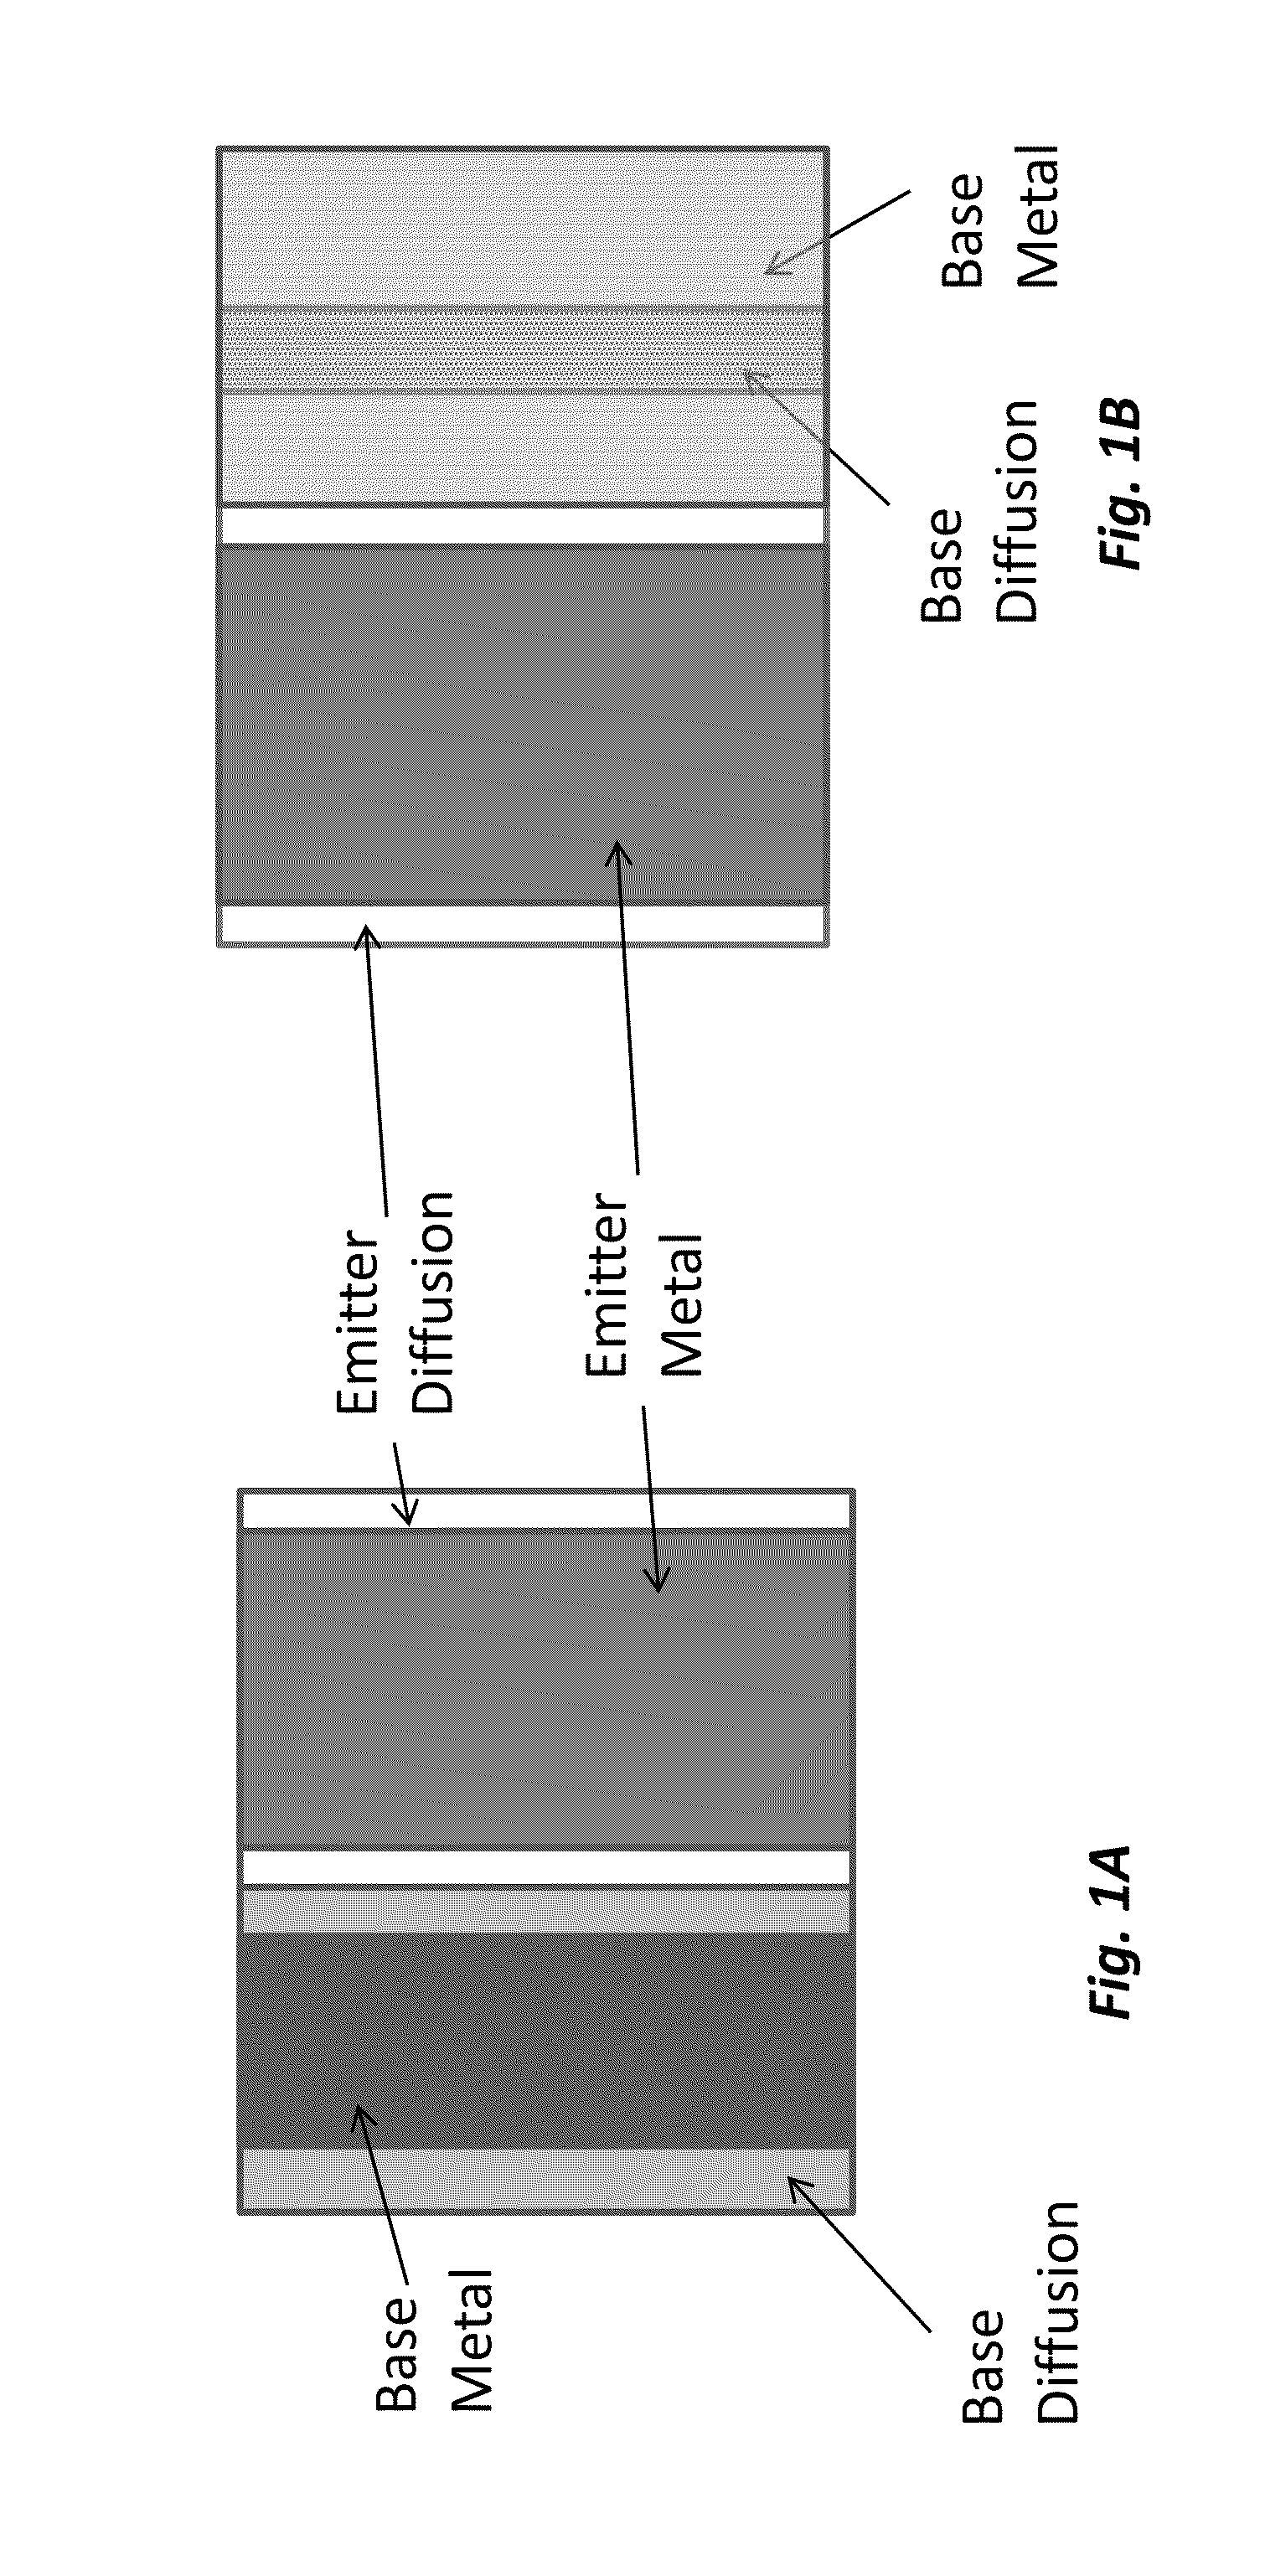 Structures and methods of formation of contiguous and non-contiguous base regions for high efficiency back-contact solar cells